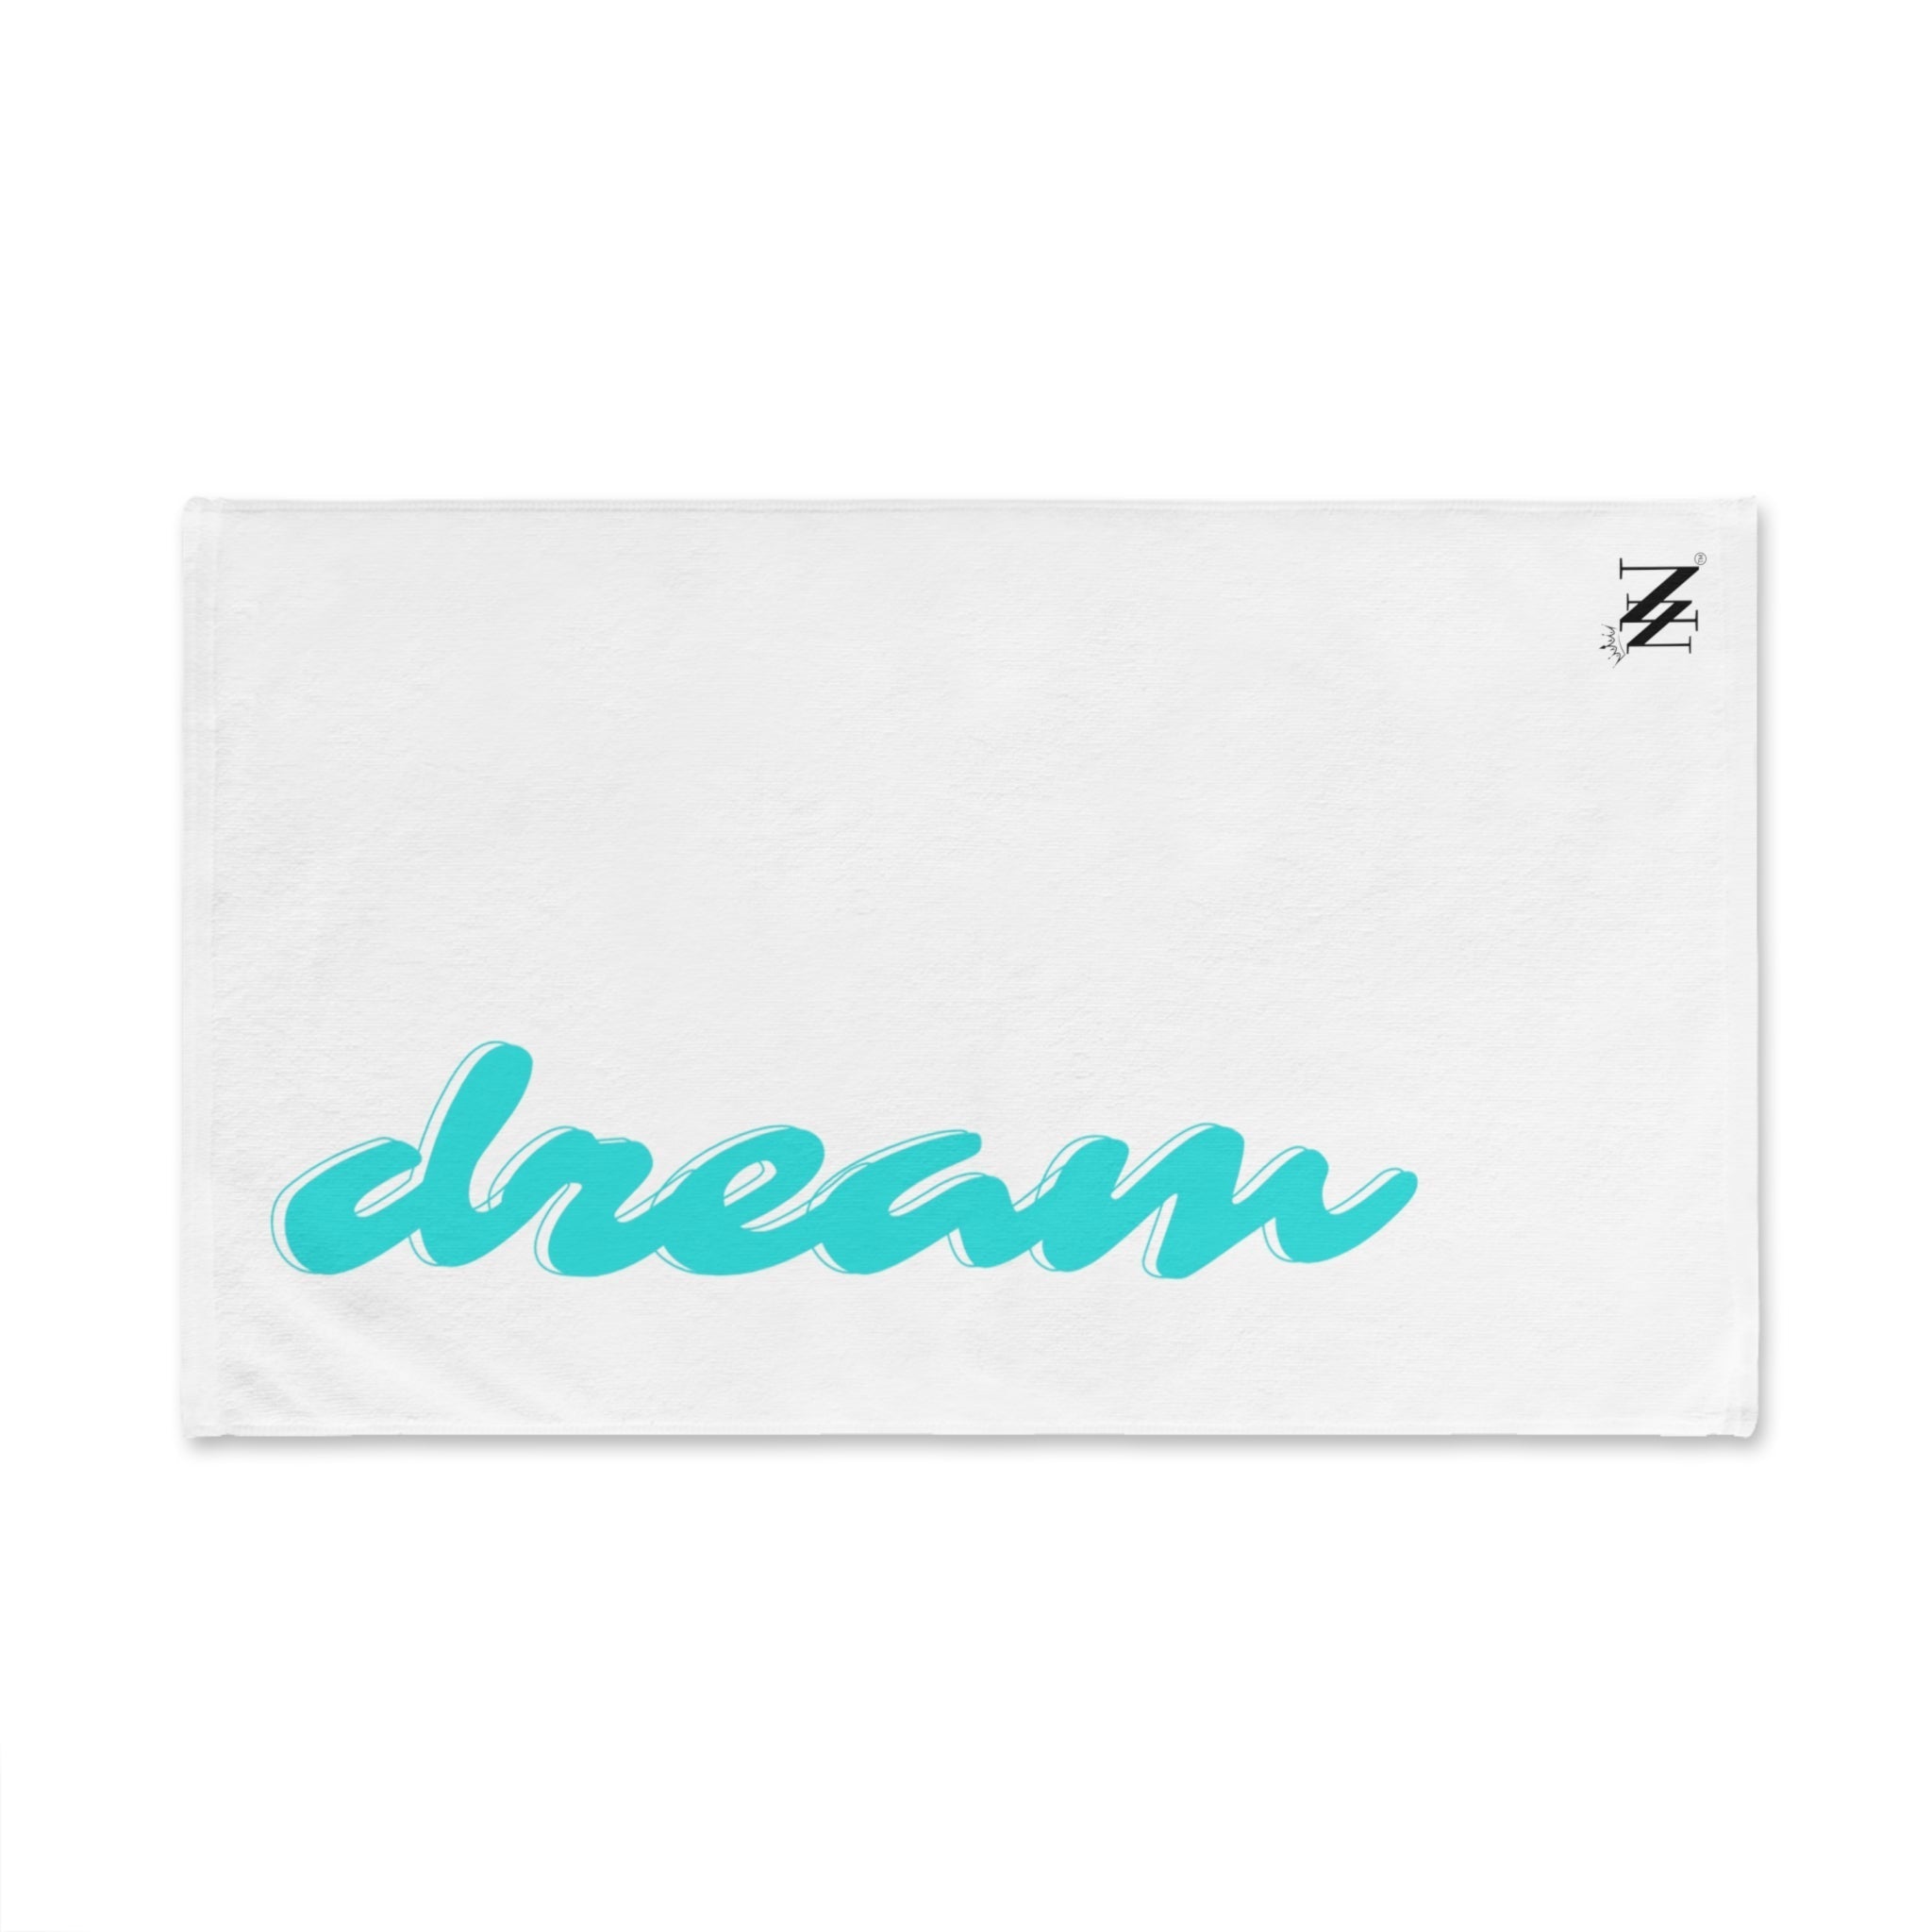 Dream Sleep White | Funny Gifts for Men - Gifts for Him - Birthday Gifts for Men, Him, Her, Husband, Boyfriend, Girlfriend, New Couple Gifts, Fathers & Valentines Day Gifts, Christmas Gifts NECTAR NAPKINS